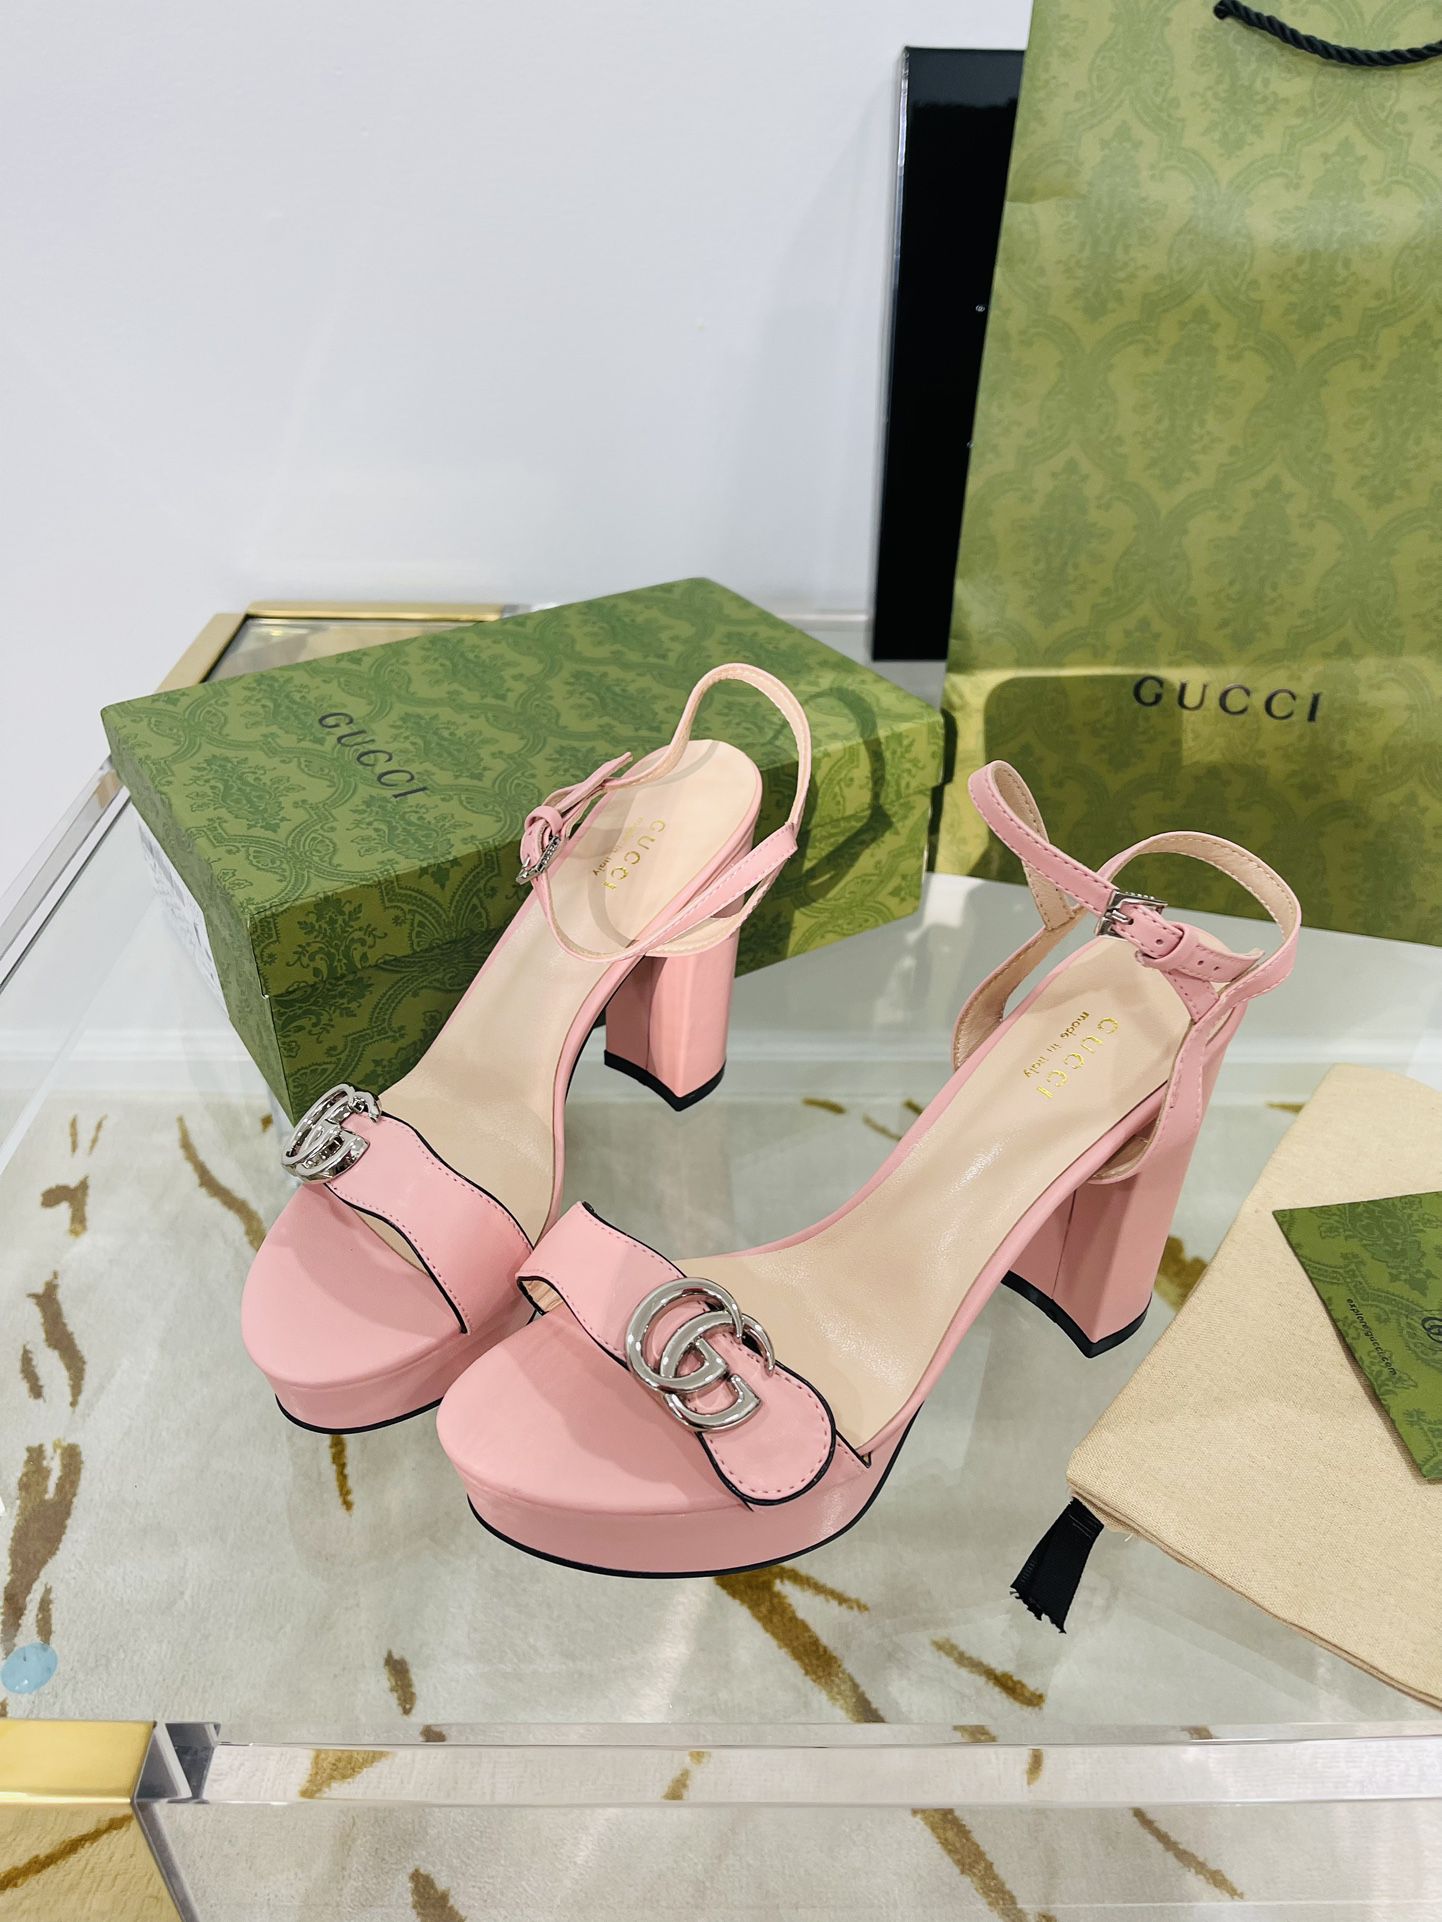 Gucci Heels- Size 8 for in NY - OfferUp